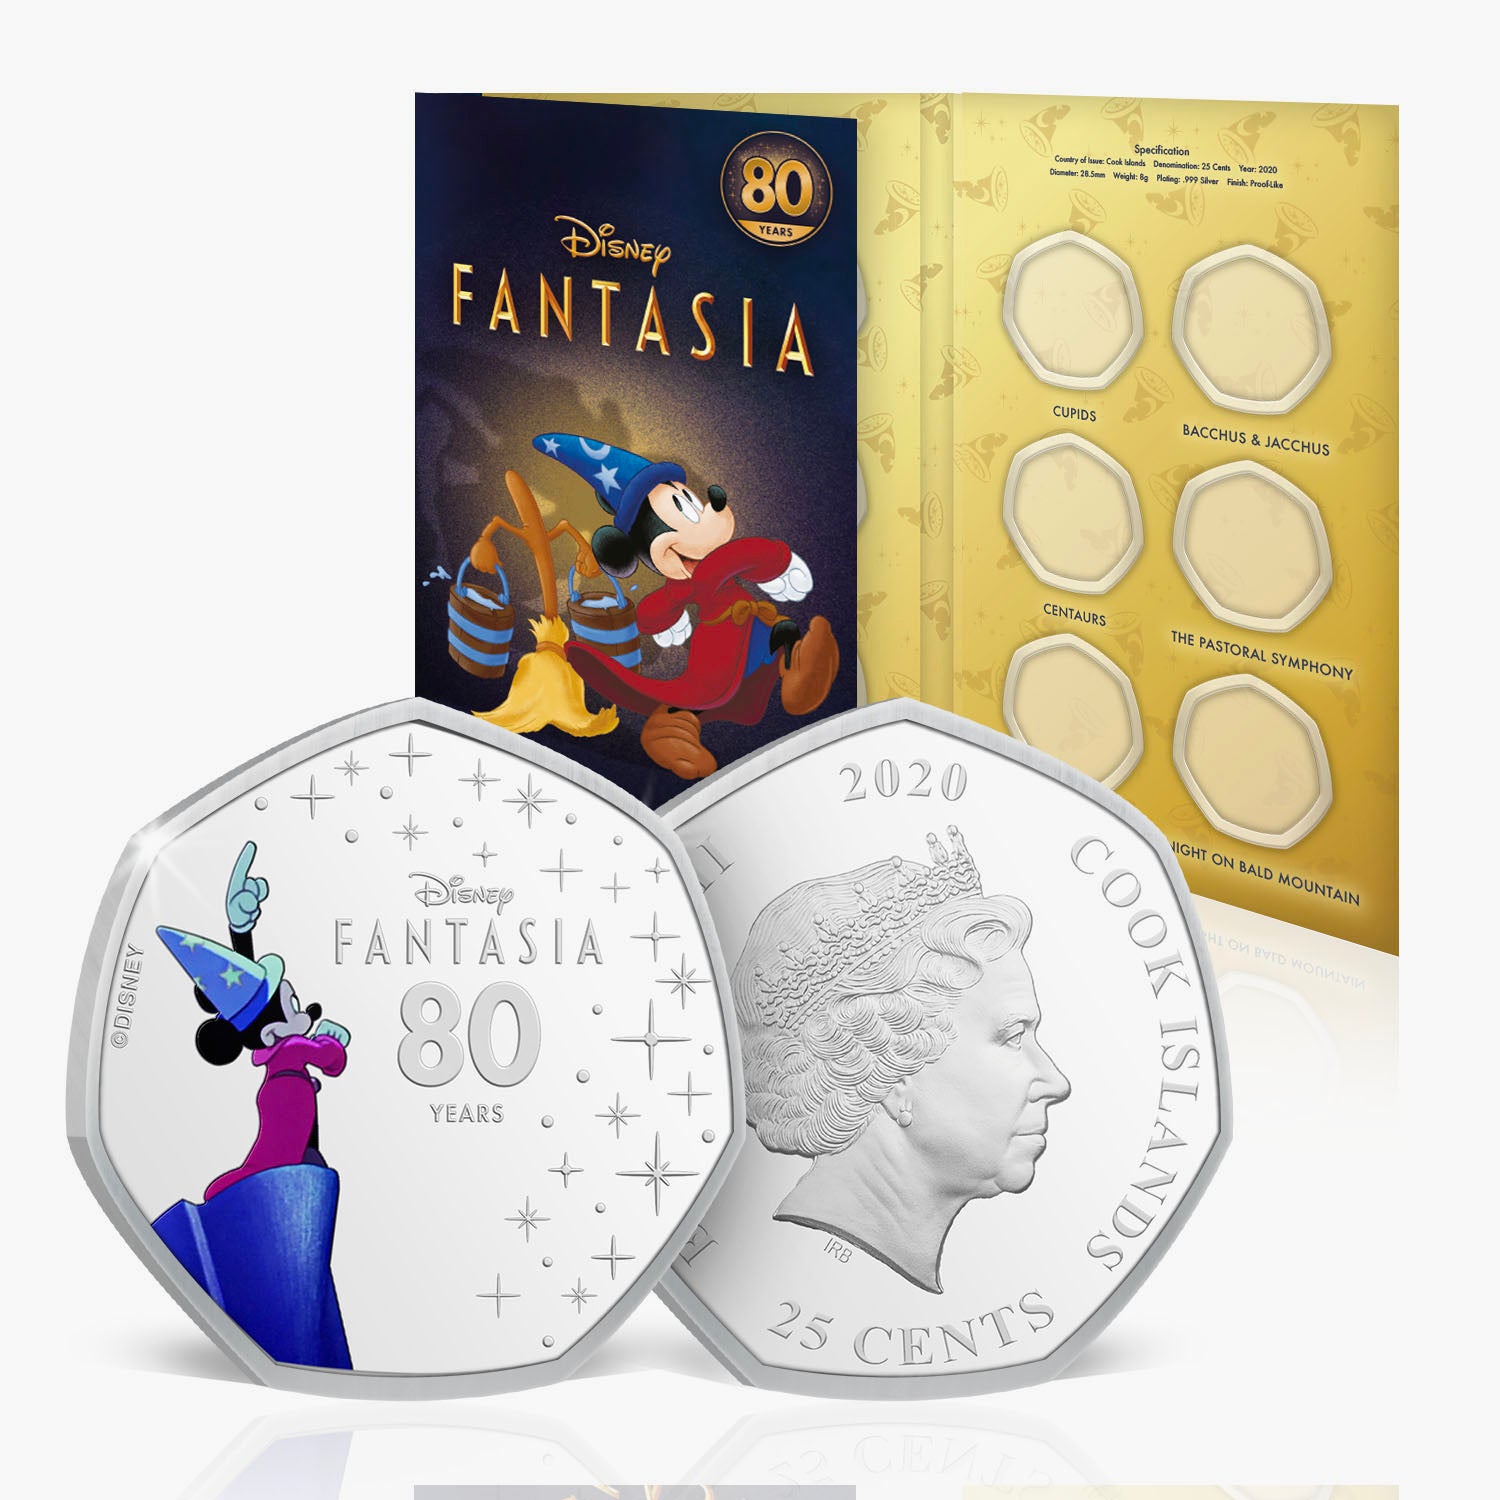 The Disney Fantasia 80th Anniversary Coin Collection